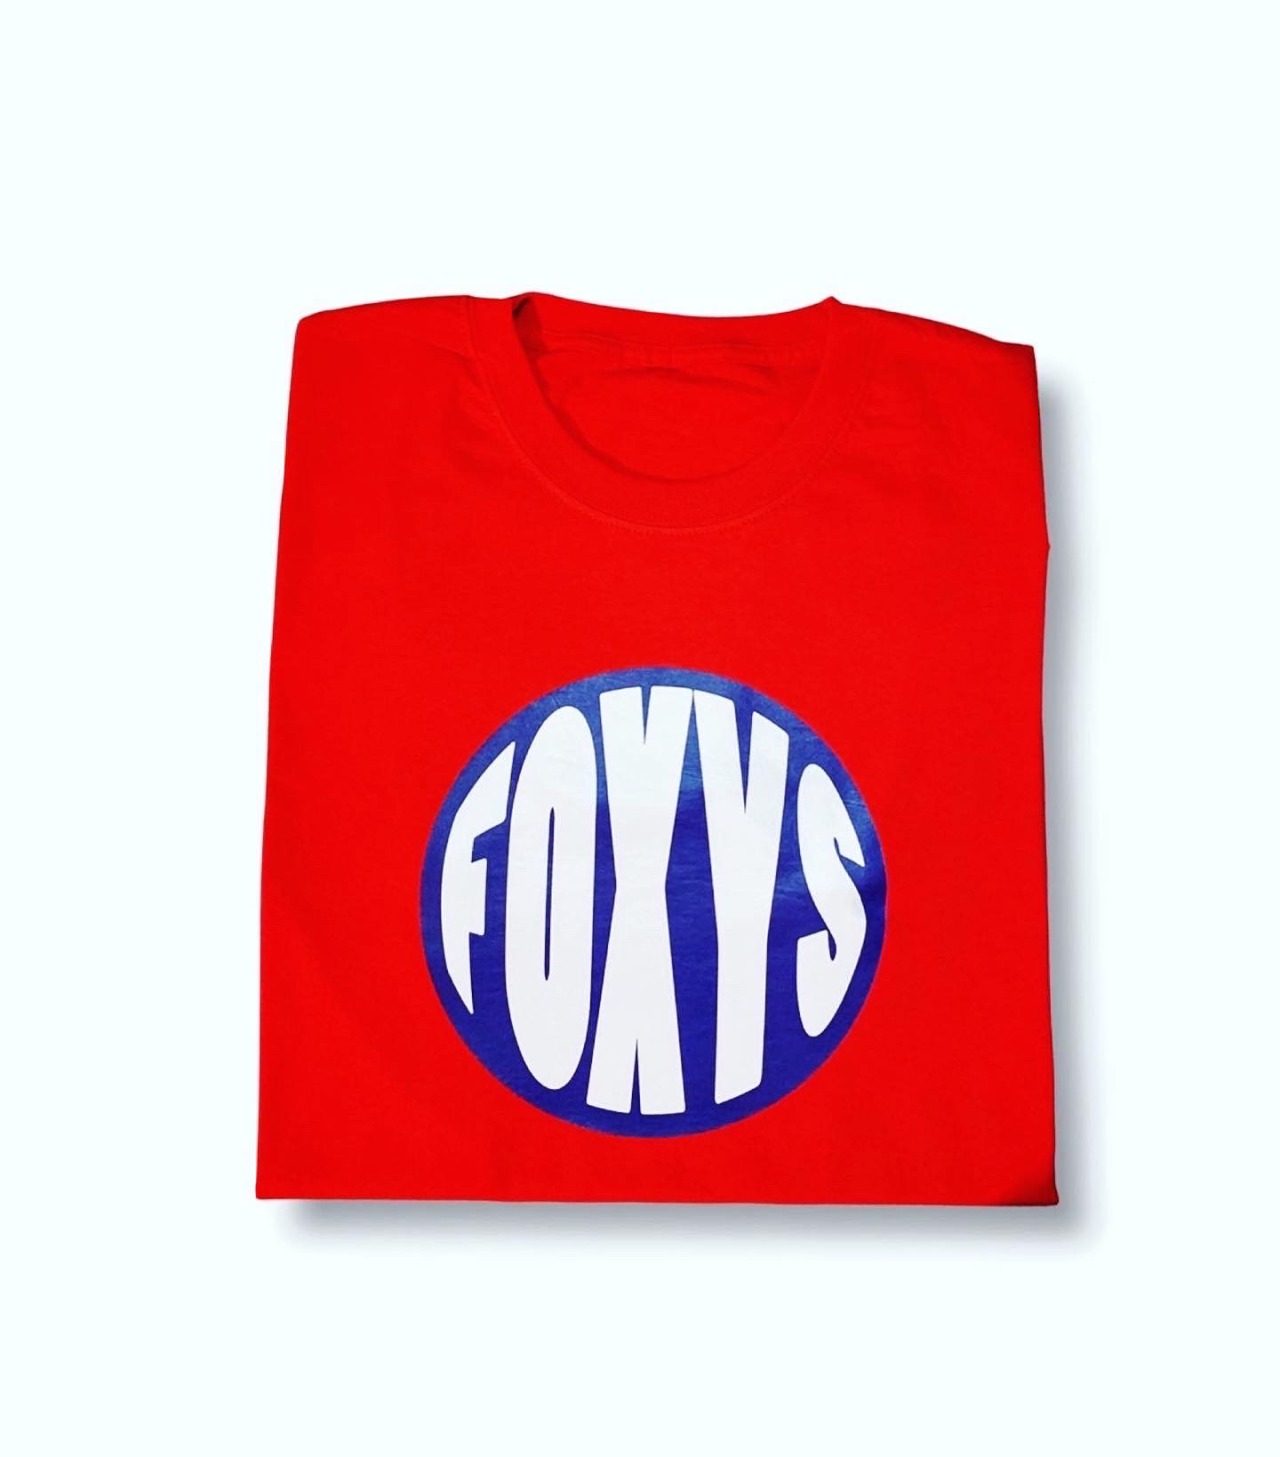 Foxys Official Circle Colors Basic/T-Shirts 299PLN
[[MORE]]*Unisex
*100% Cotton
*Colors - Red/Yellow/White
*Rozmiary - S/M/L
Cena 299PLN